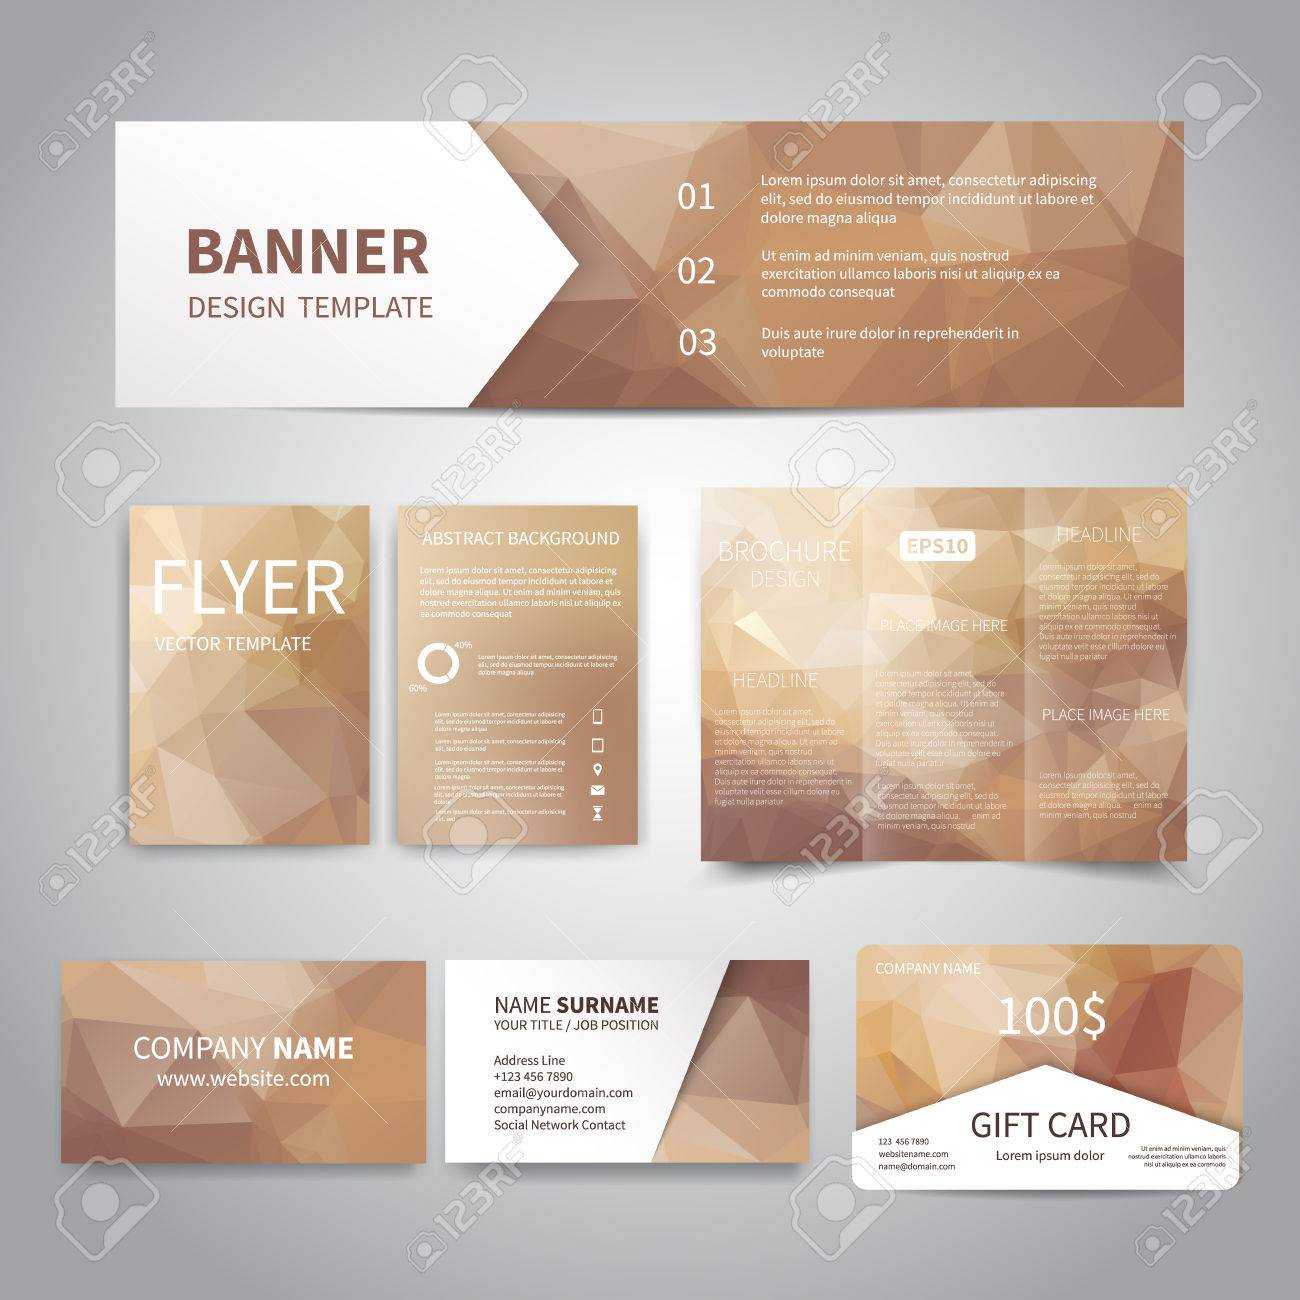 Banner, Flyers, Brochure, Business Cards, Gift Card Design Templates Set  With Geometric Triangular Beige Background. Corporate Identity Set, For Advertising Cards Templates